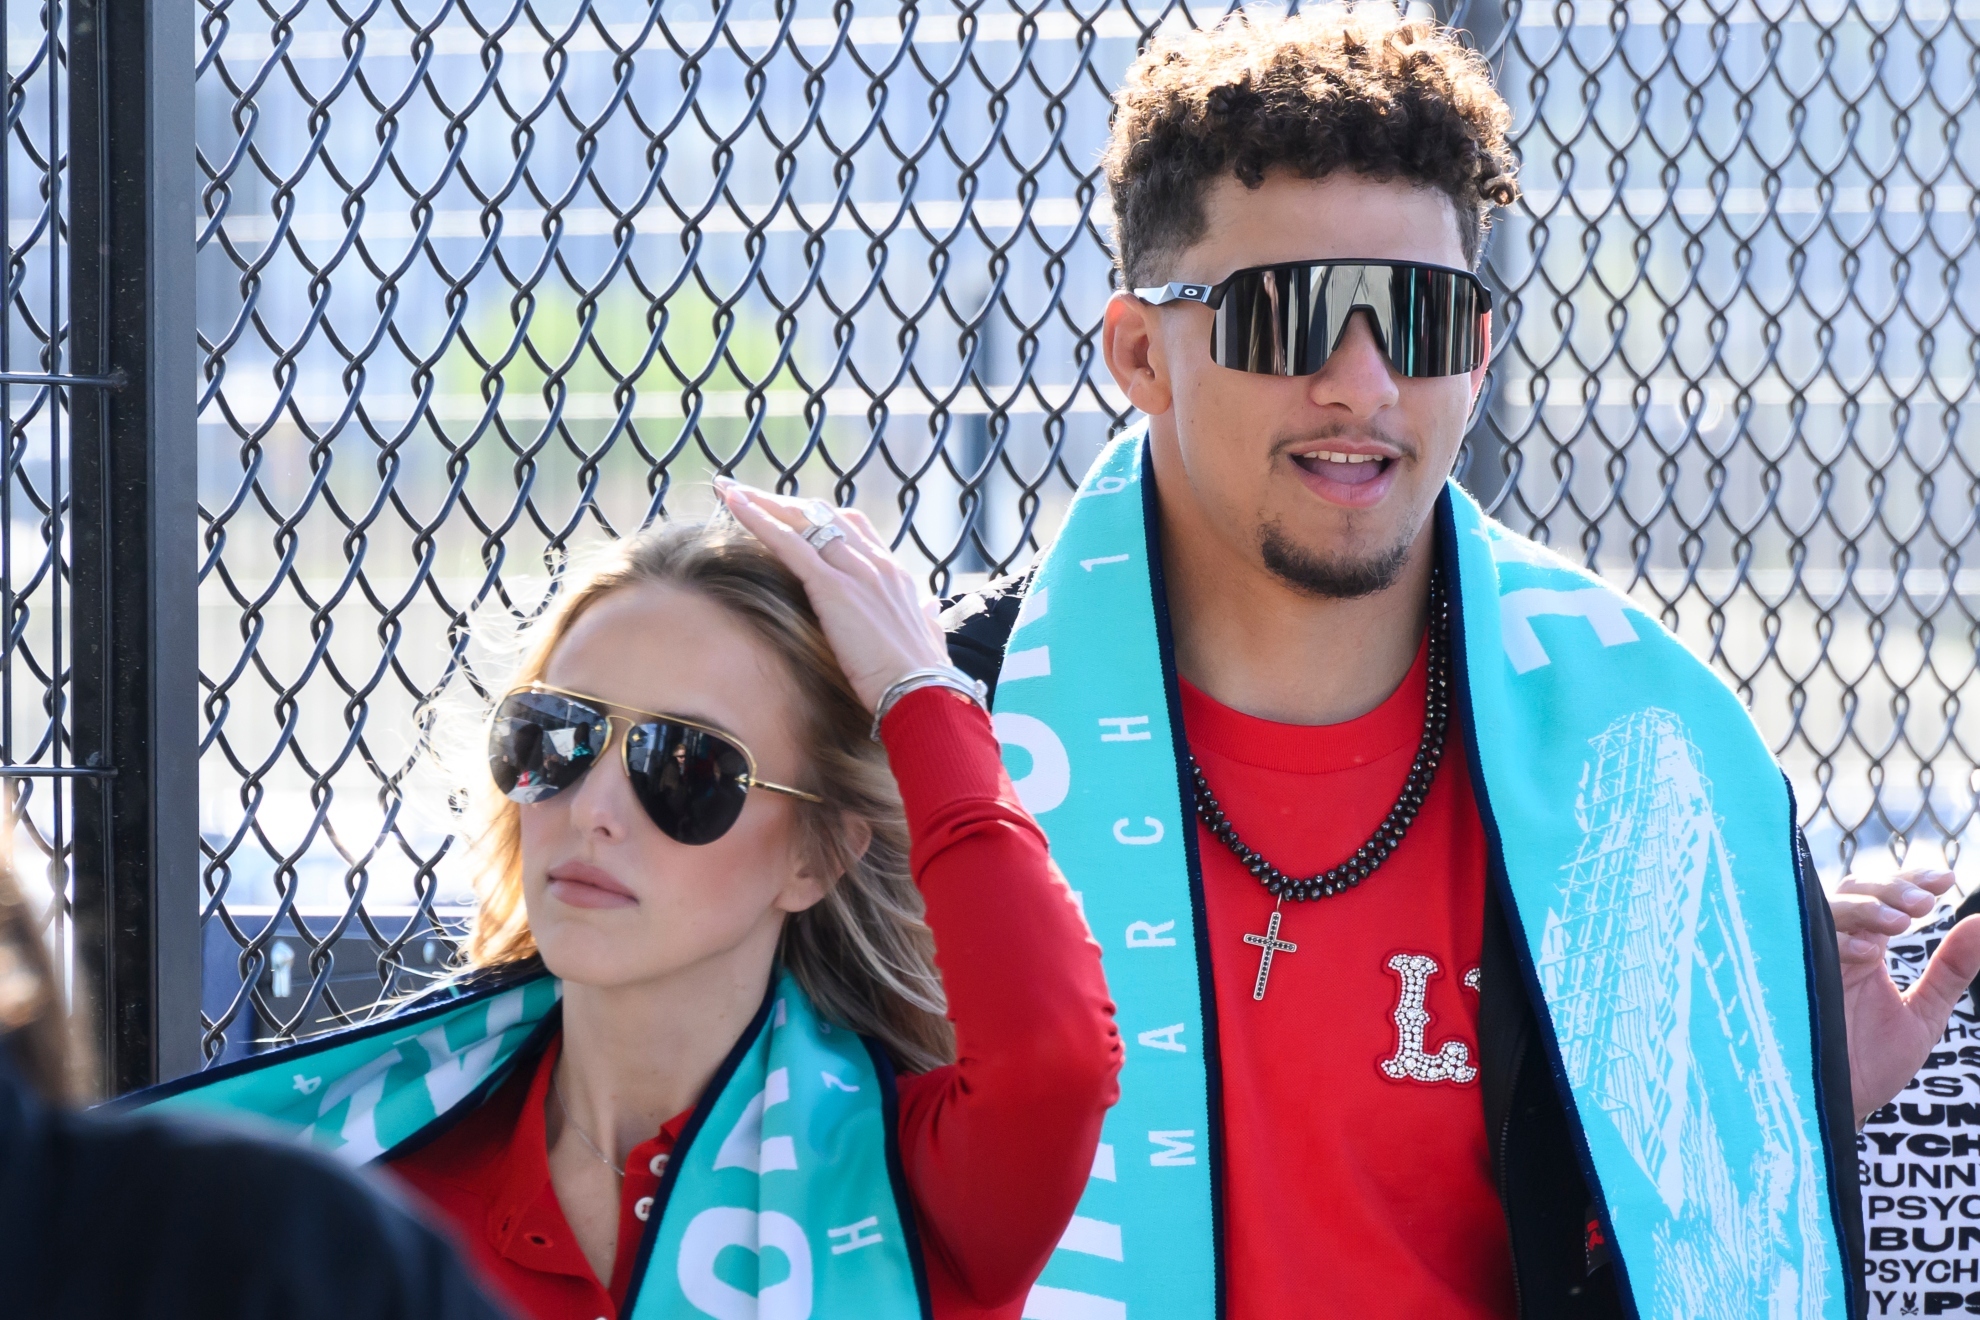 Kansas City Chiefs quarterback Patrick Mahomes, right, and his wife, Brittany Mahomes, co-owners of the Kansas City Current soccer team